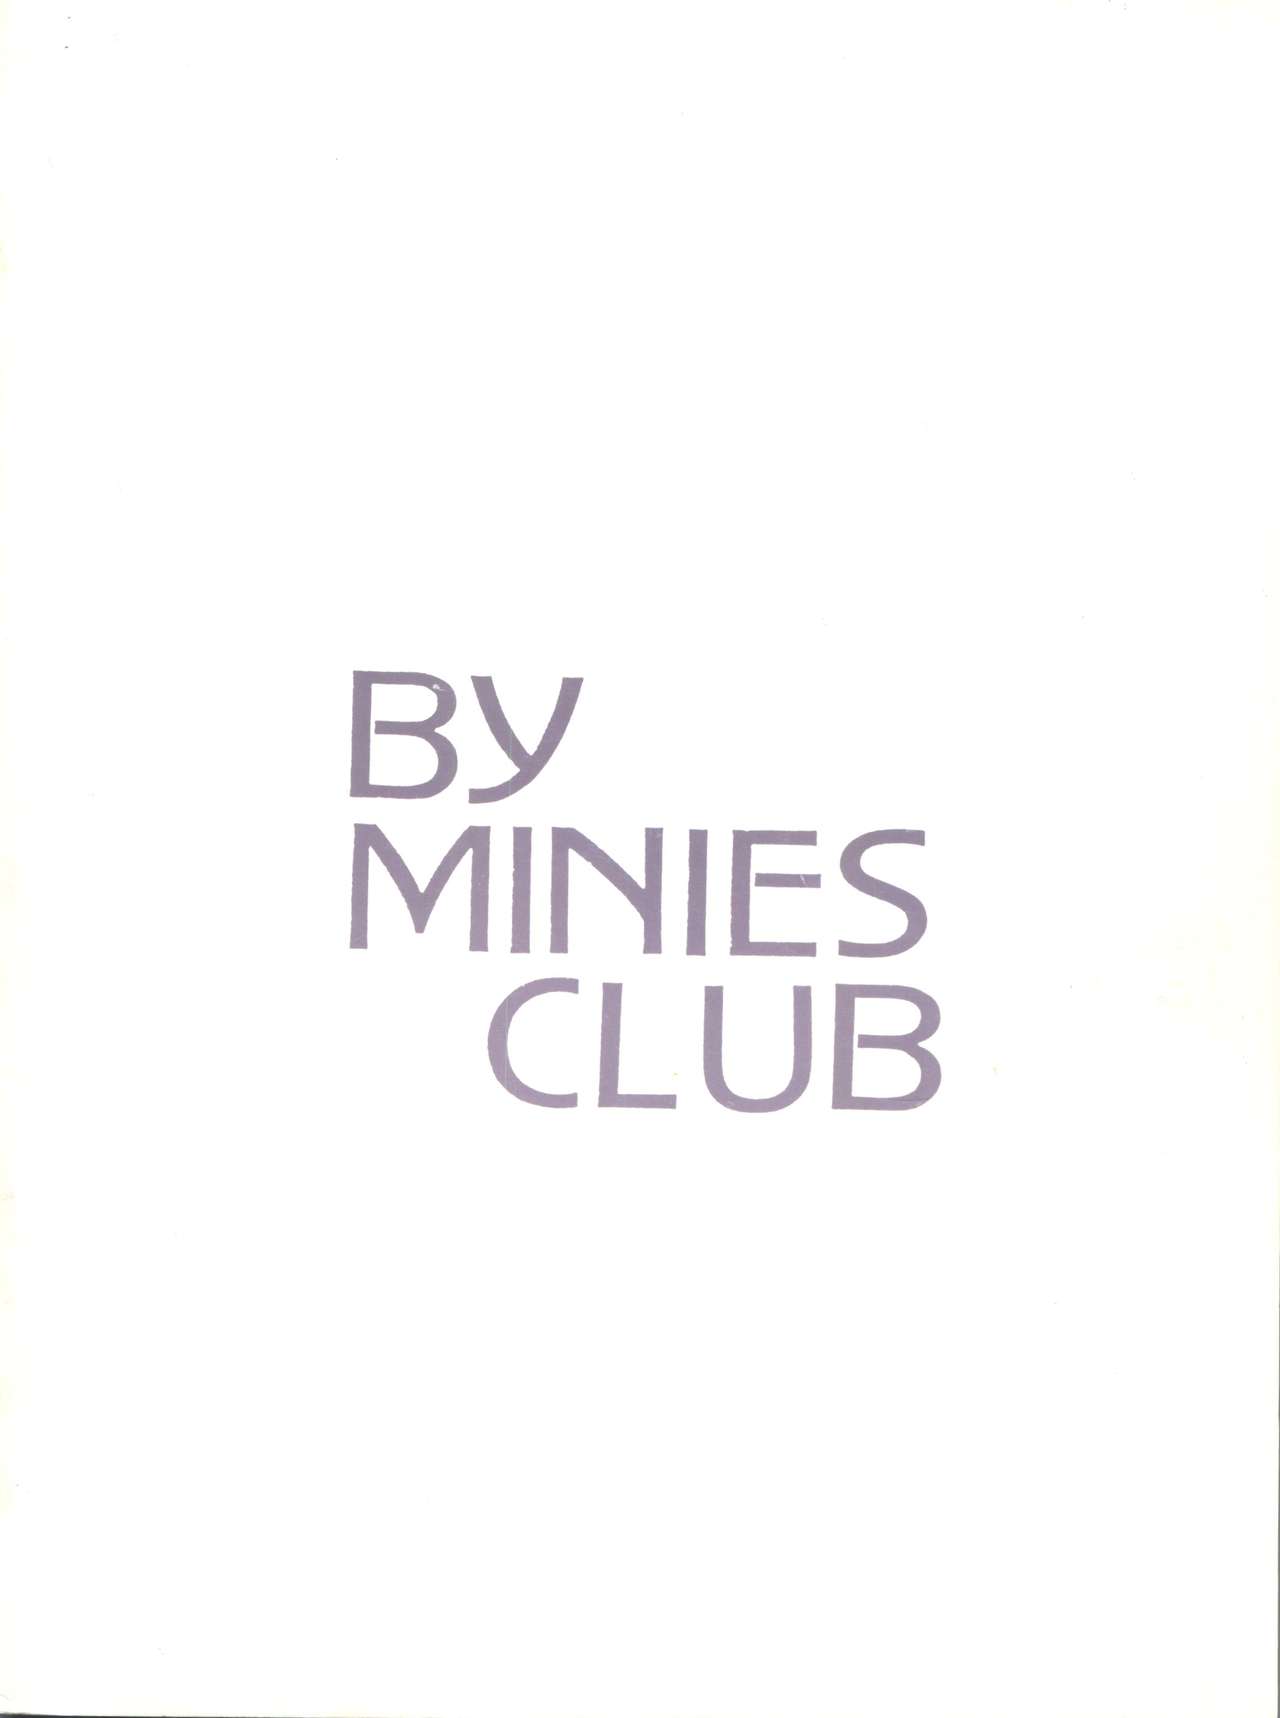 [MINIES CLUB (よろず)] After midnight - minies club 25 (サイレントメビウス)